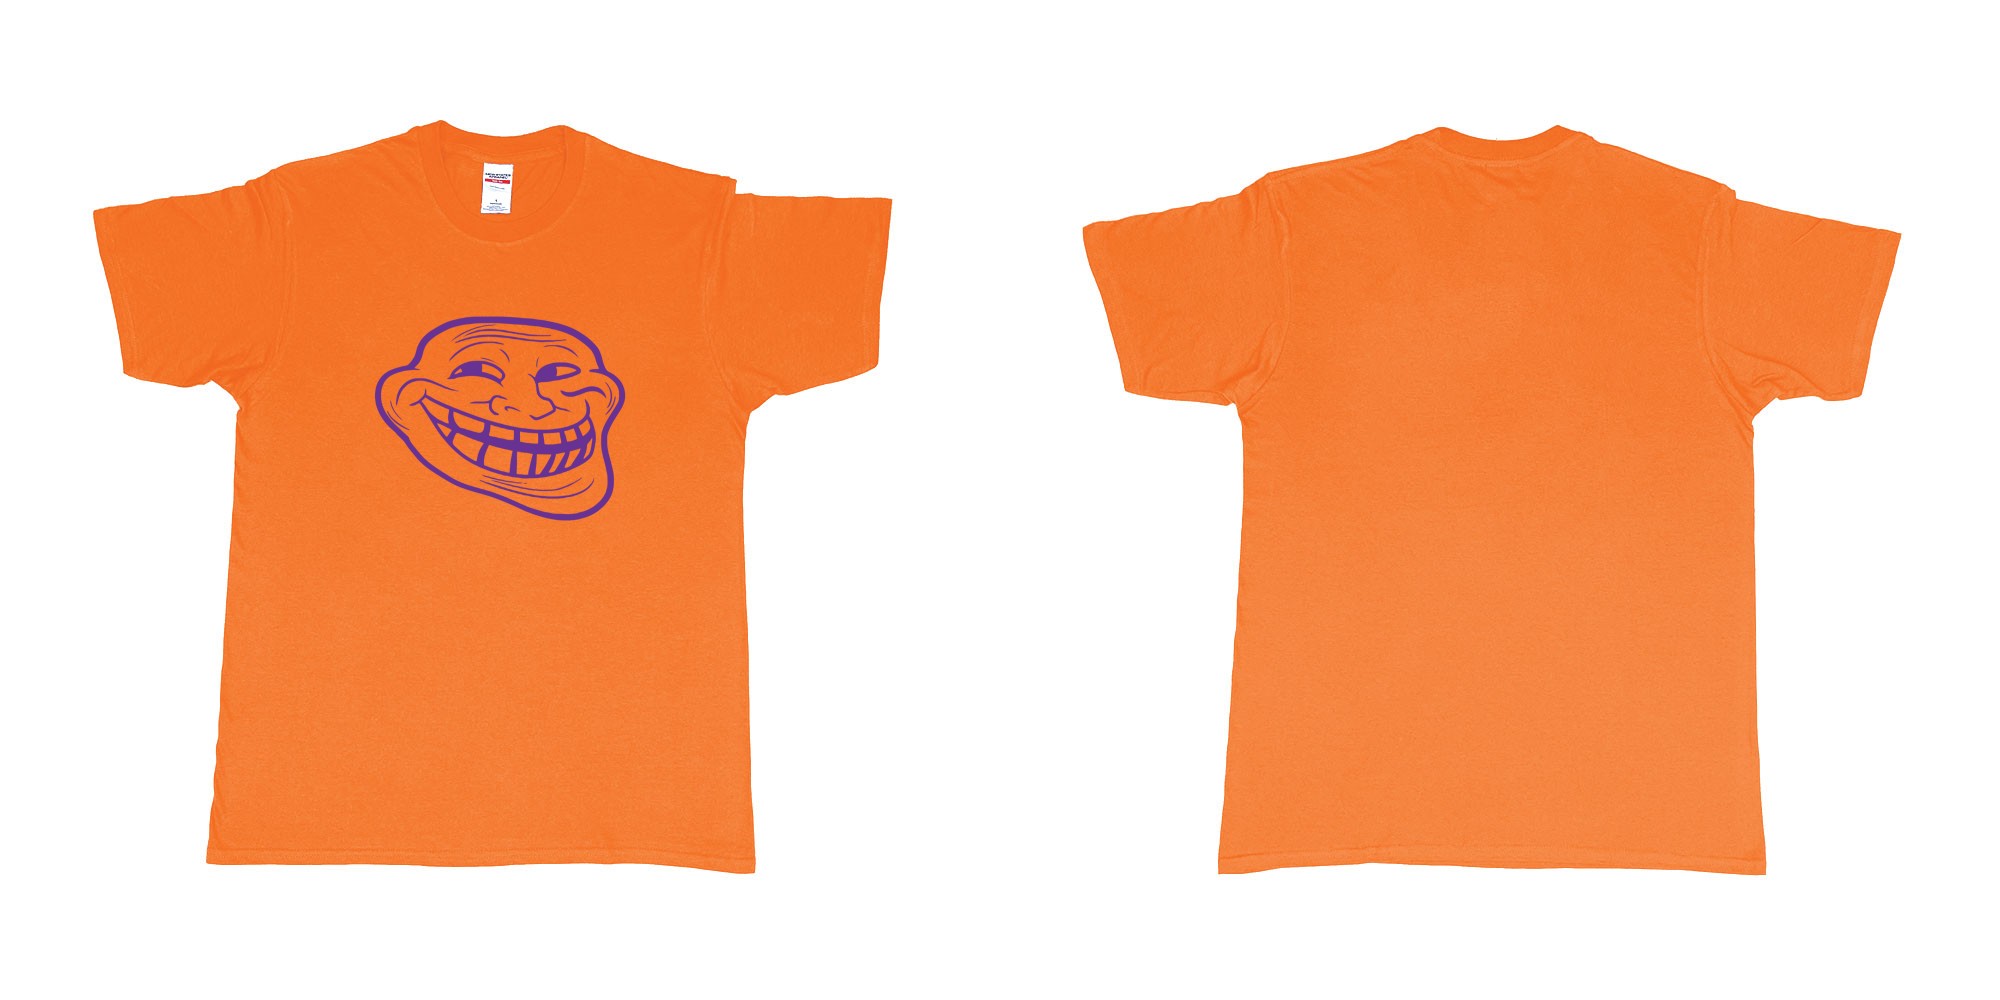 Custom tshirt design Trolling in fabric color orange choice your own text made in Bali by The Pirate Way